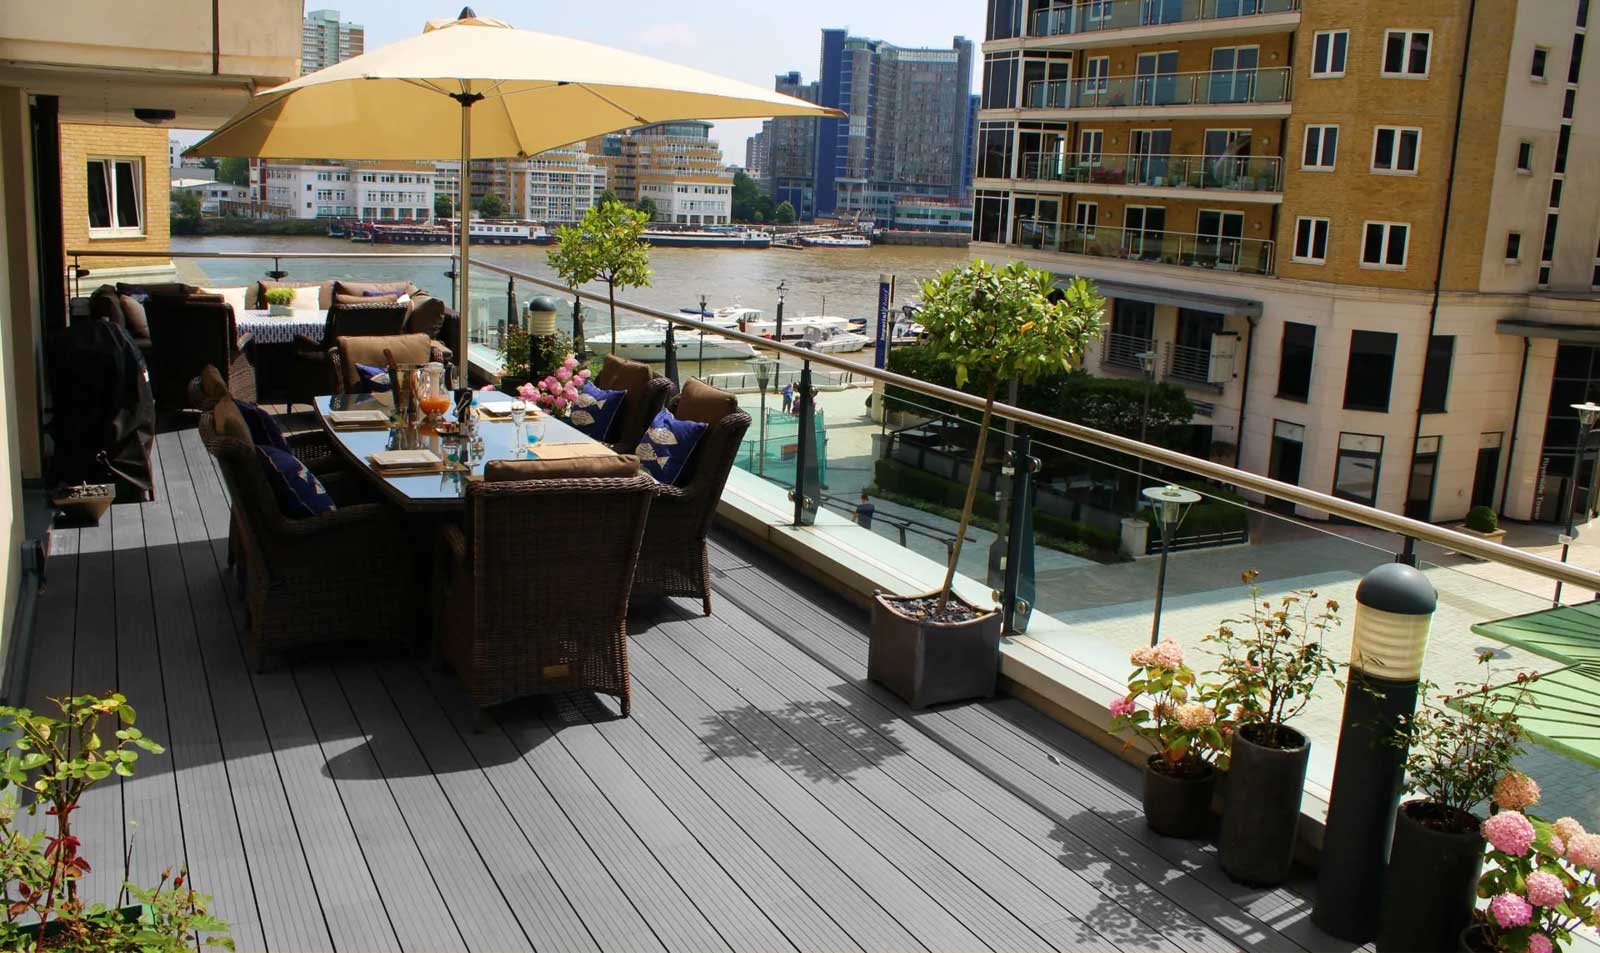 Timber decking on a balcony with rattan decking furniture